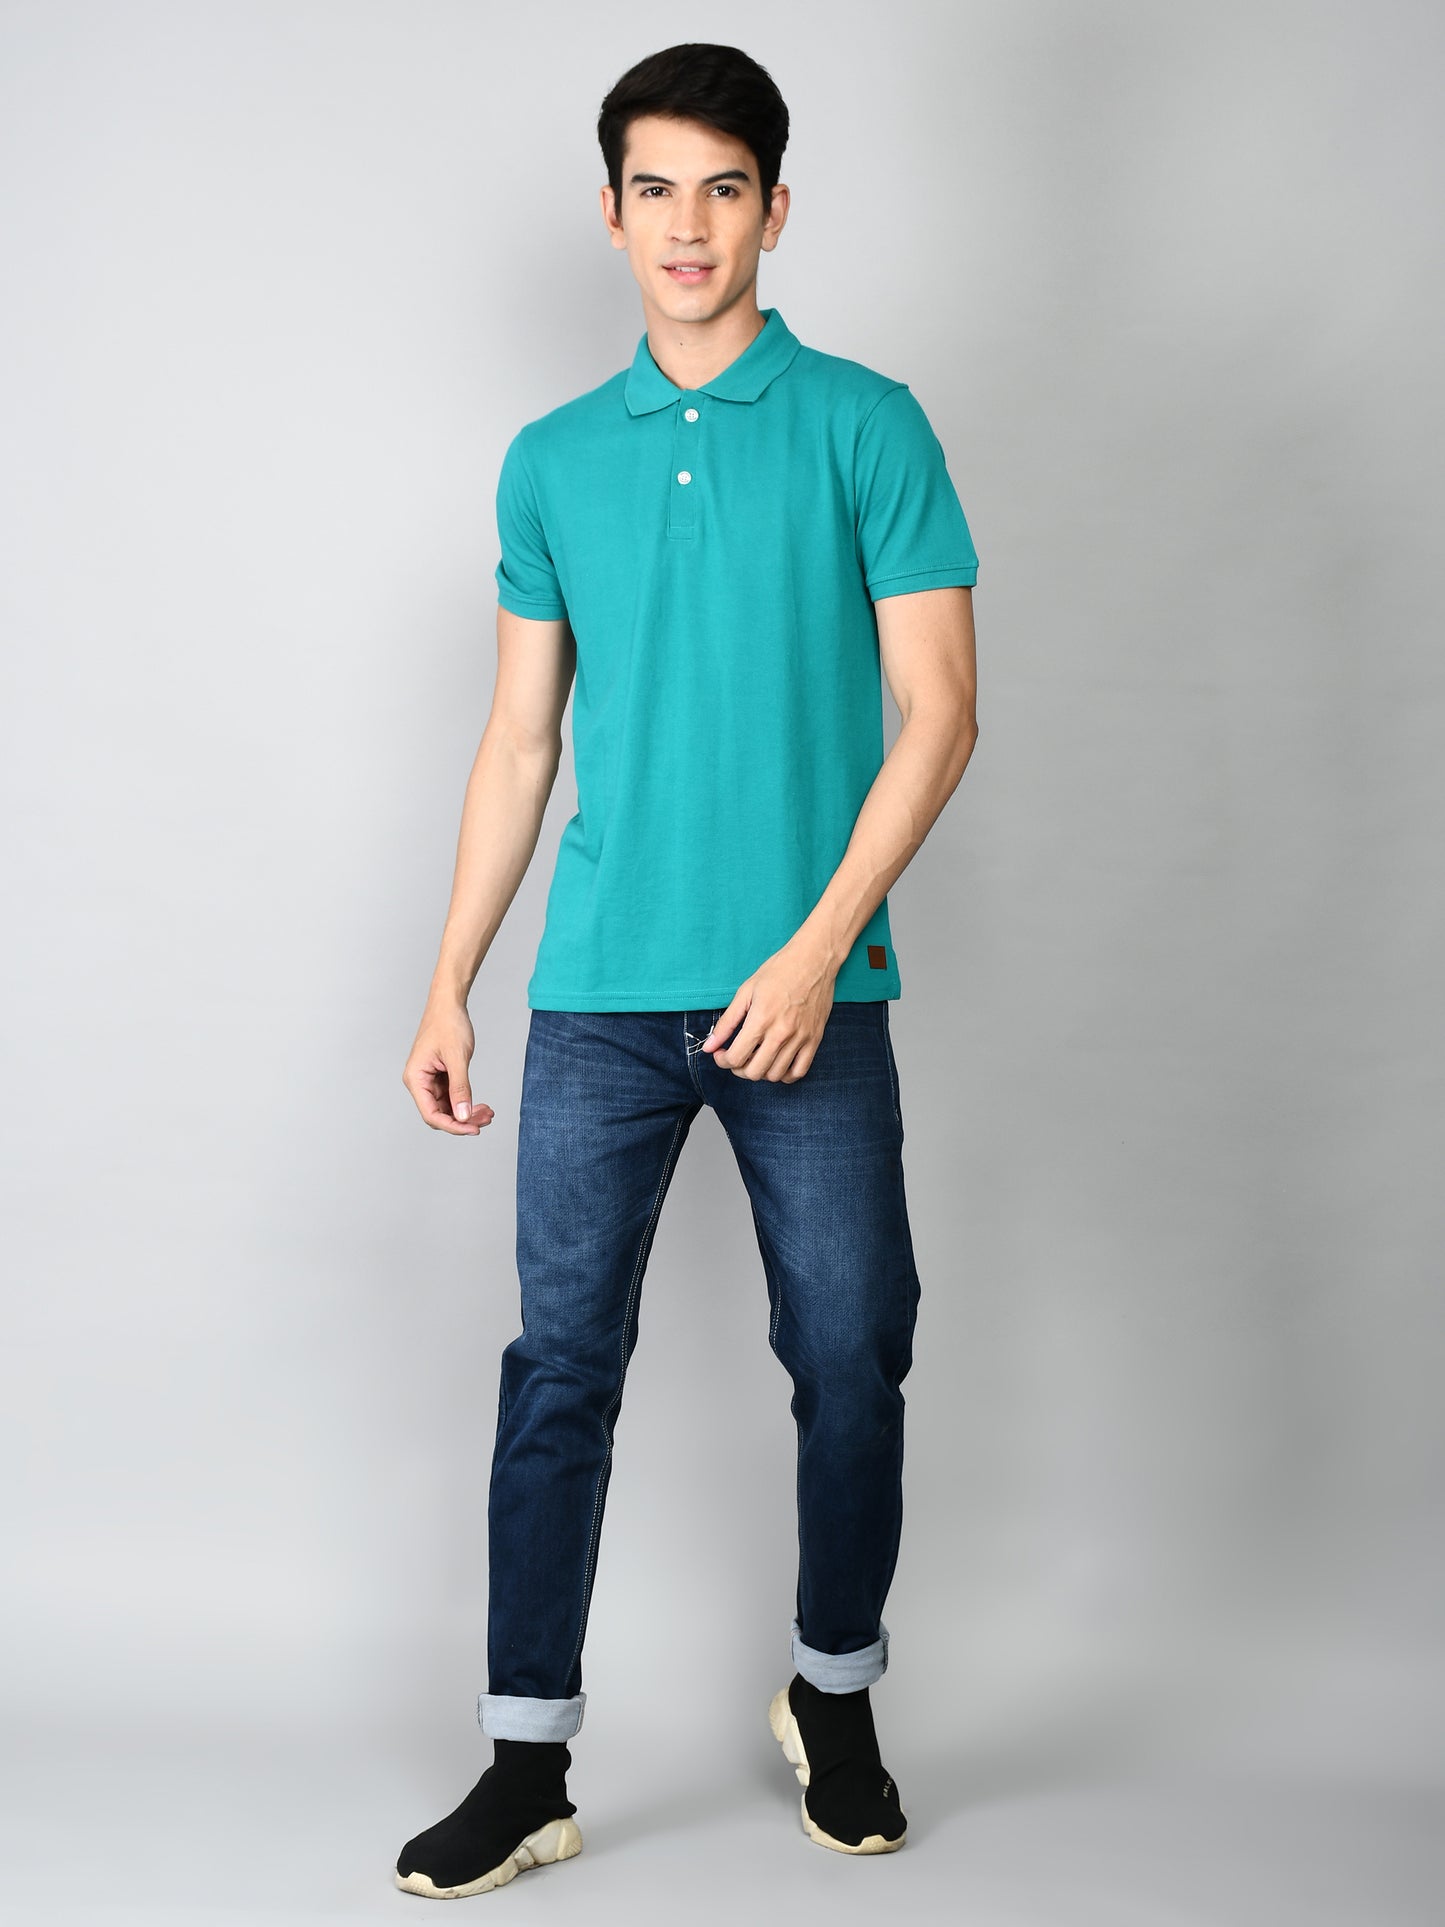 Golfer Polo T-Shirt for Men : Persion Green